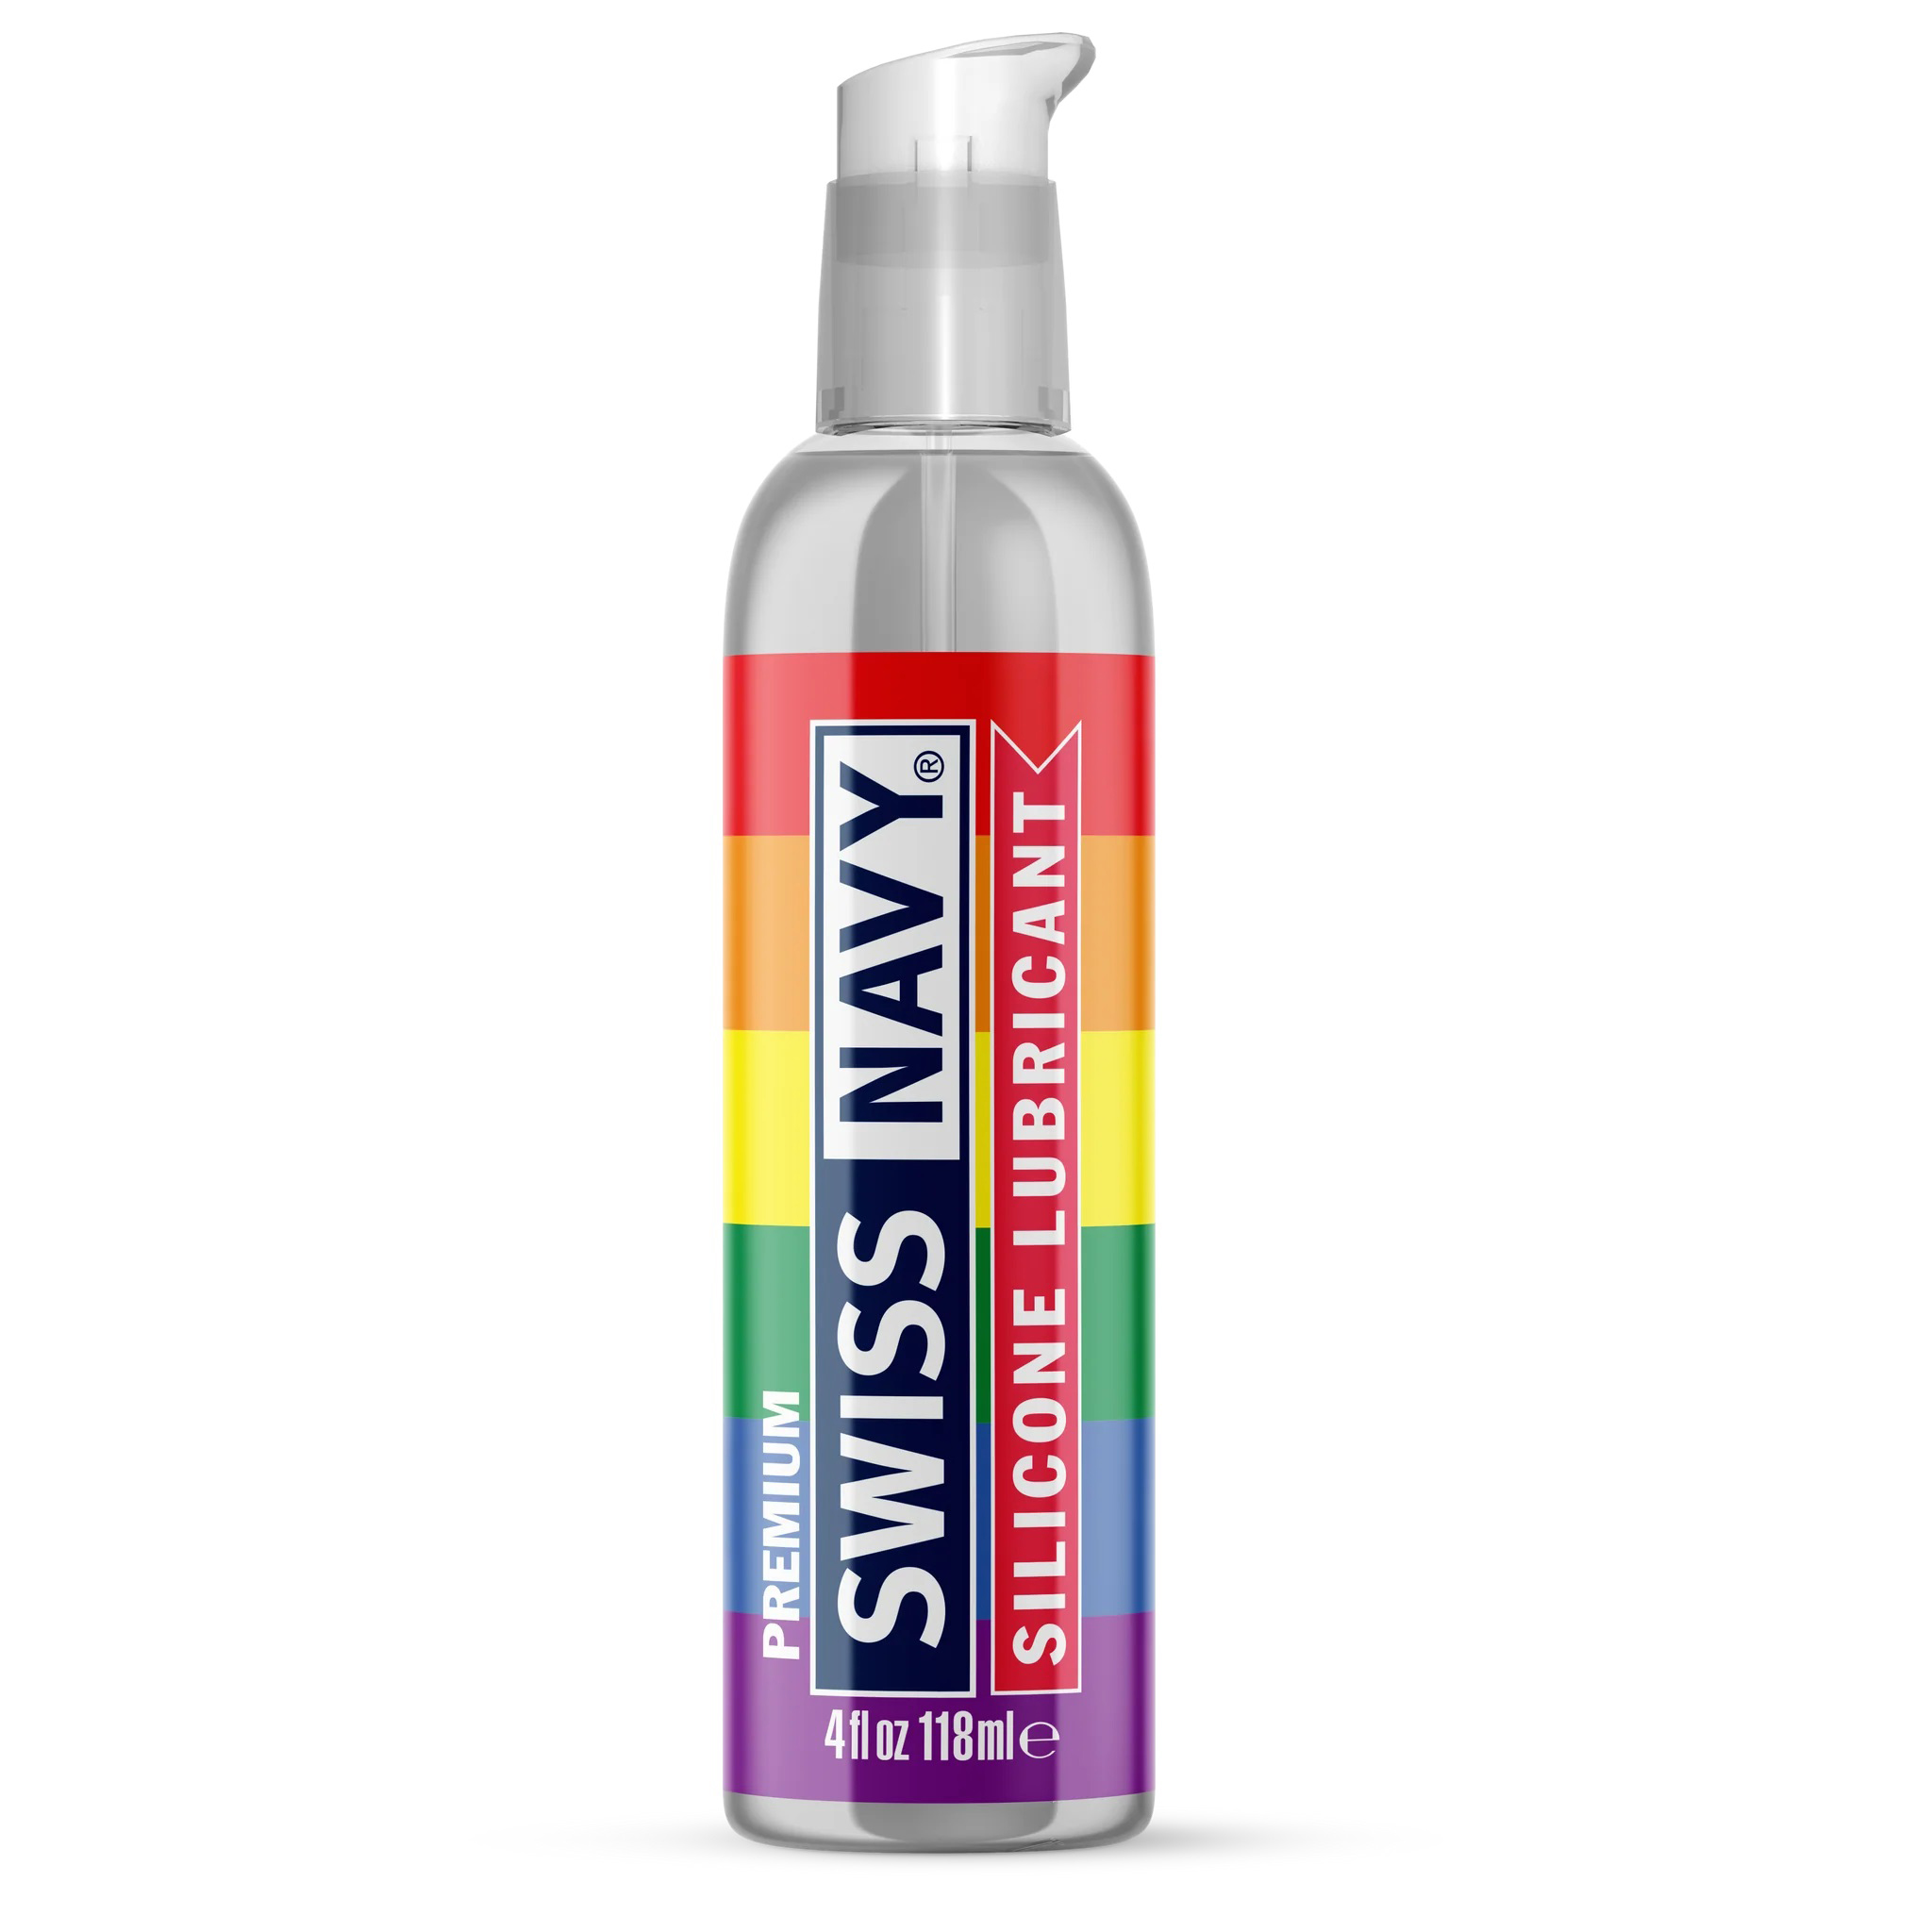 swiss navy pride edition silicone lubricant oz 